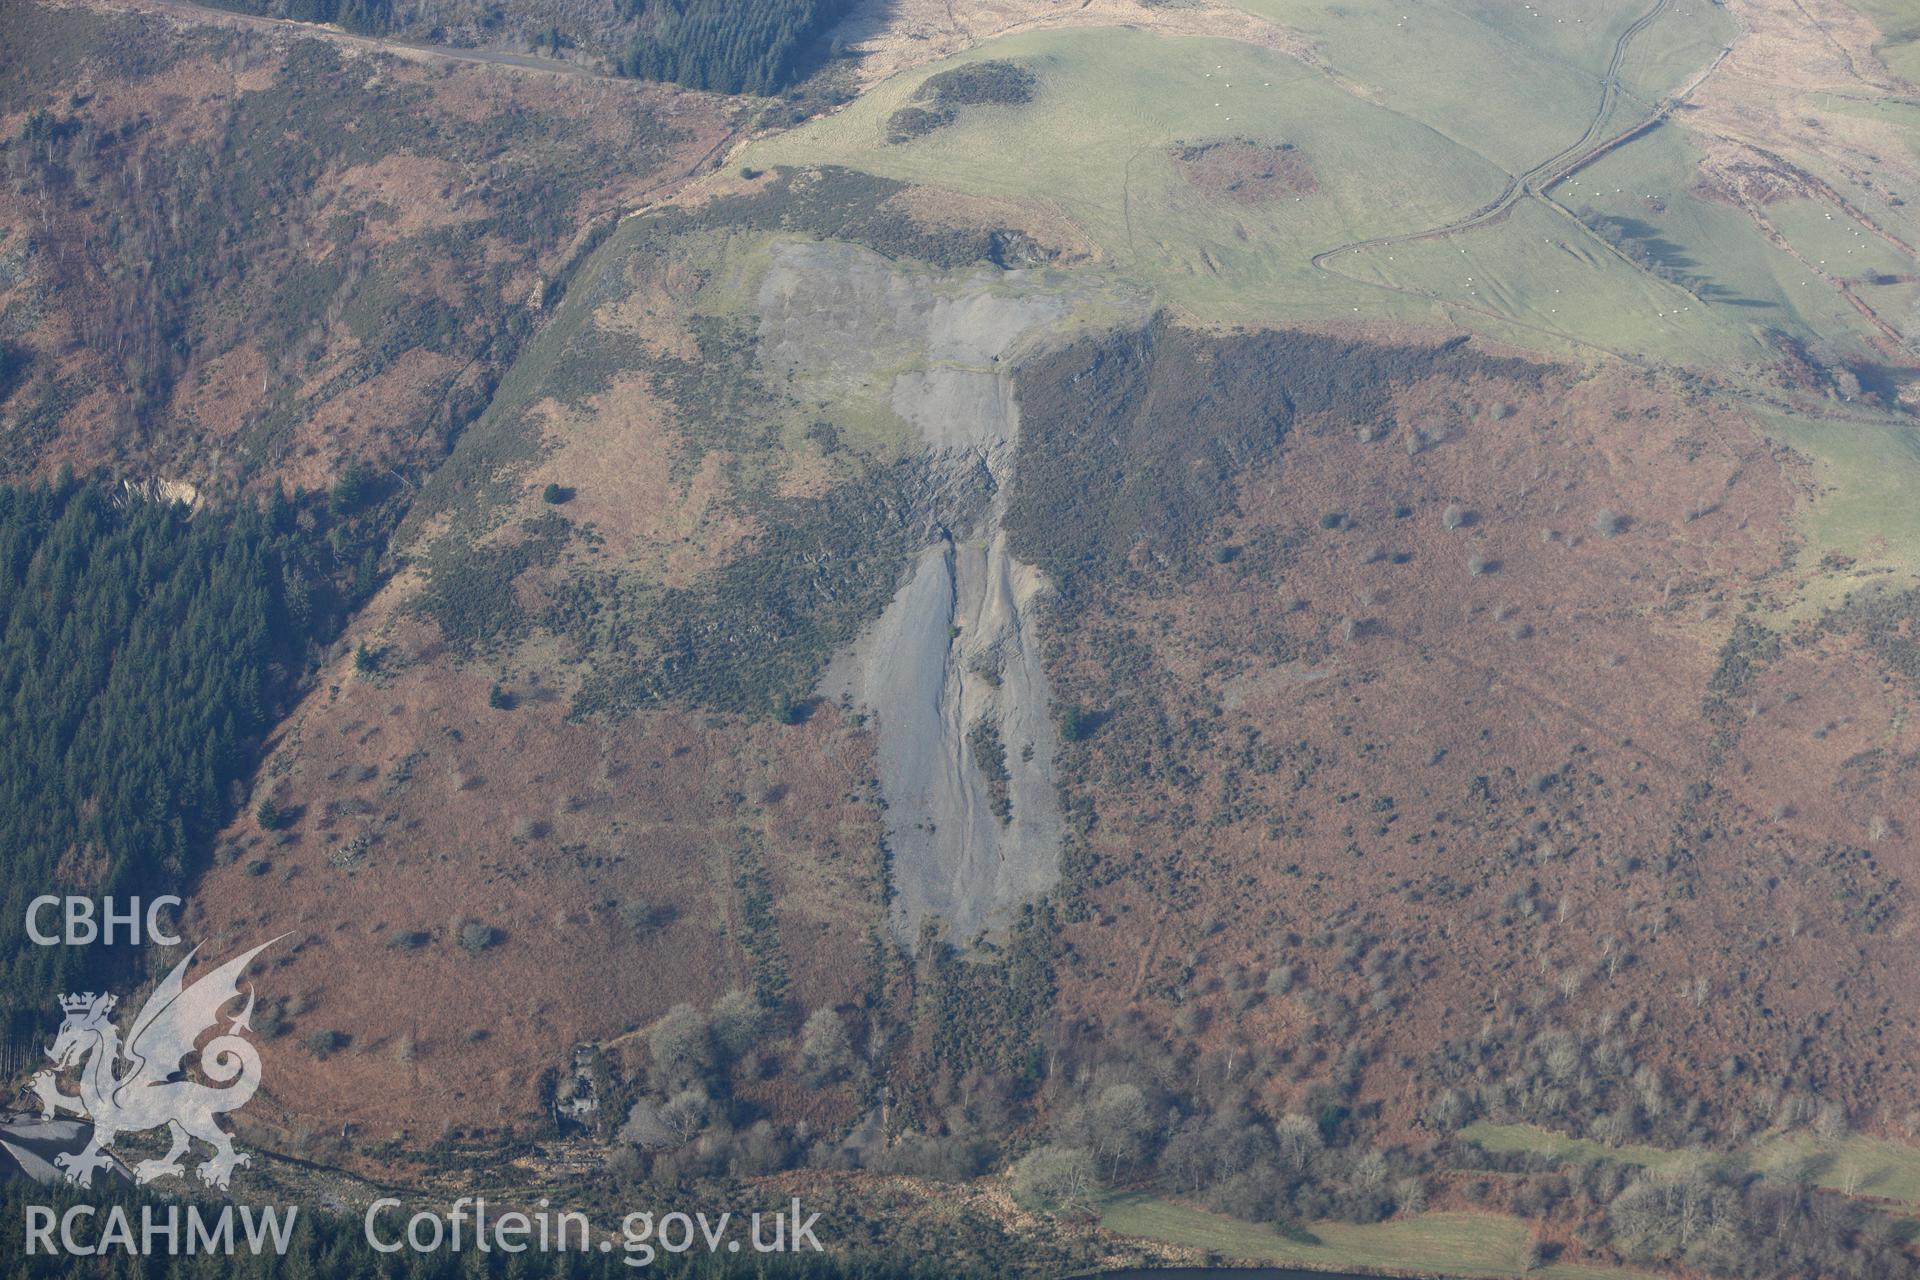 RCAHMW colour oblique photograph of Grogwynion Lead Mine, View from South over Ystwyth River. Taken by Toby Driver on 07/02/2012.